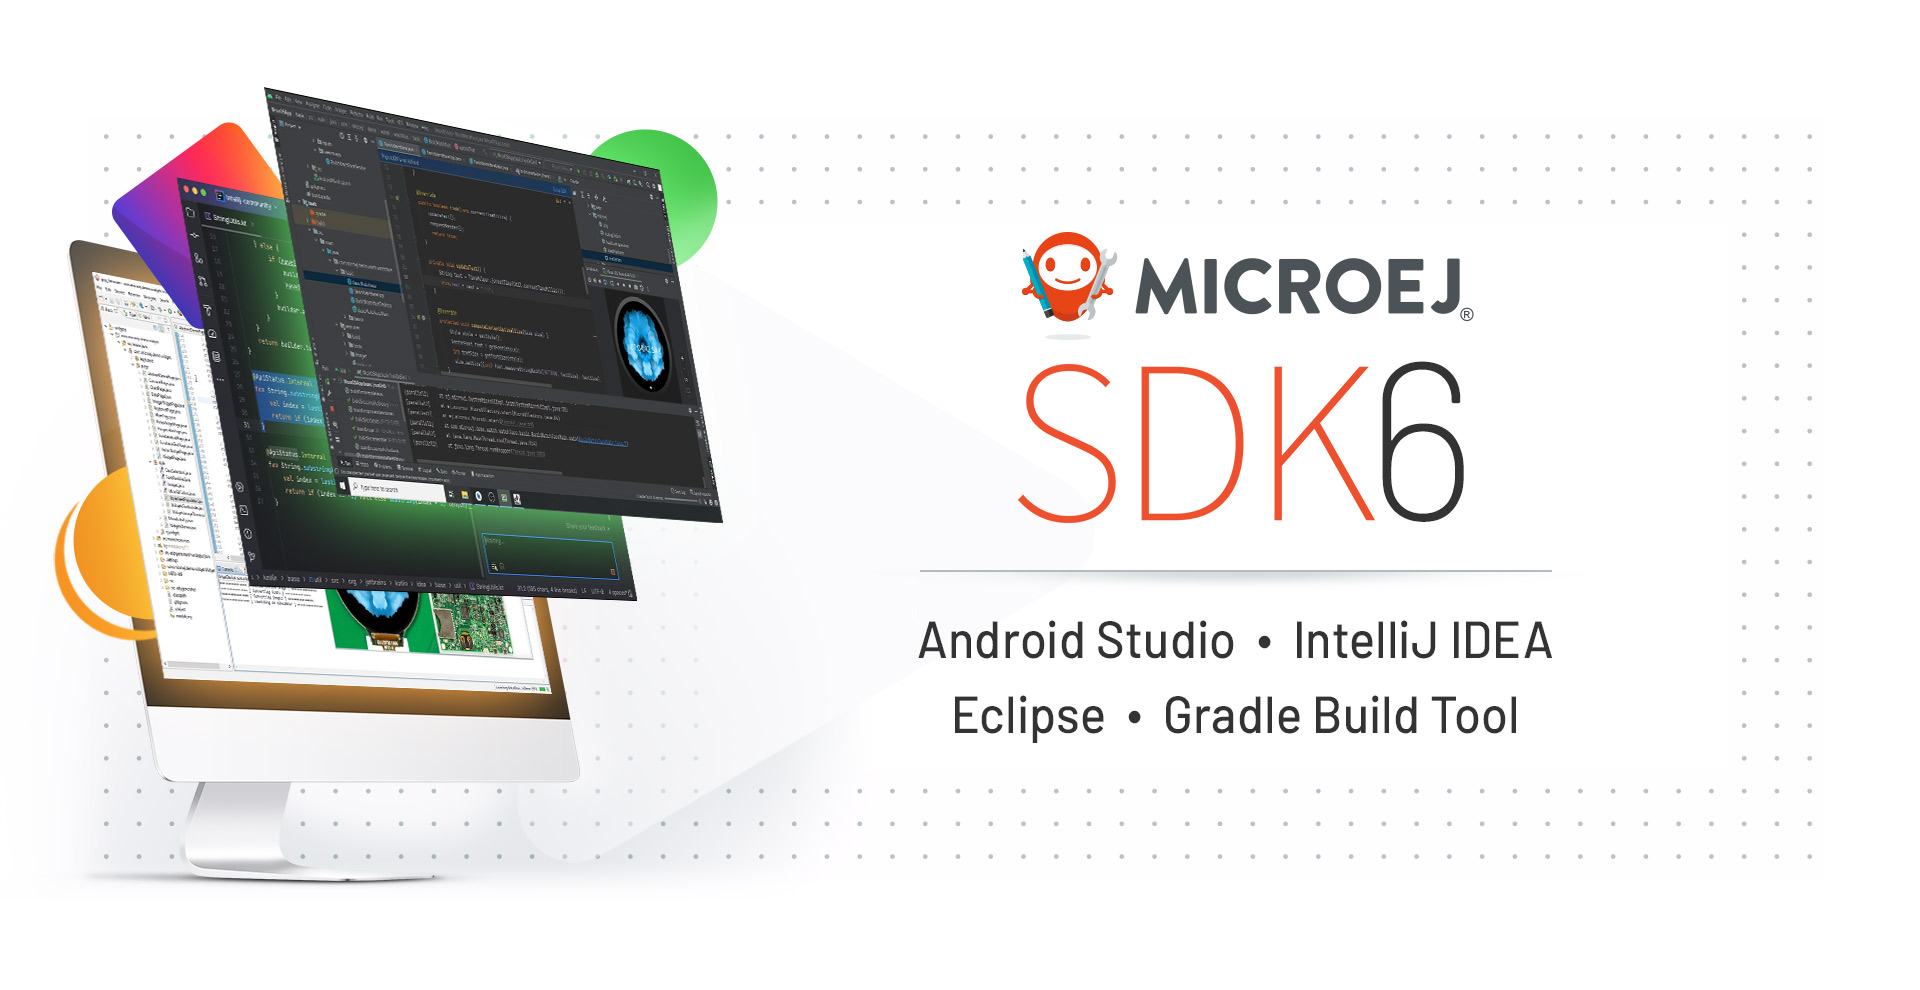 MICROEJ SDK supports IntelliJ, Android Studio, Eclipse, and Gradle Build System